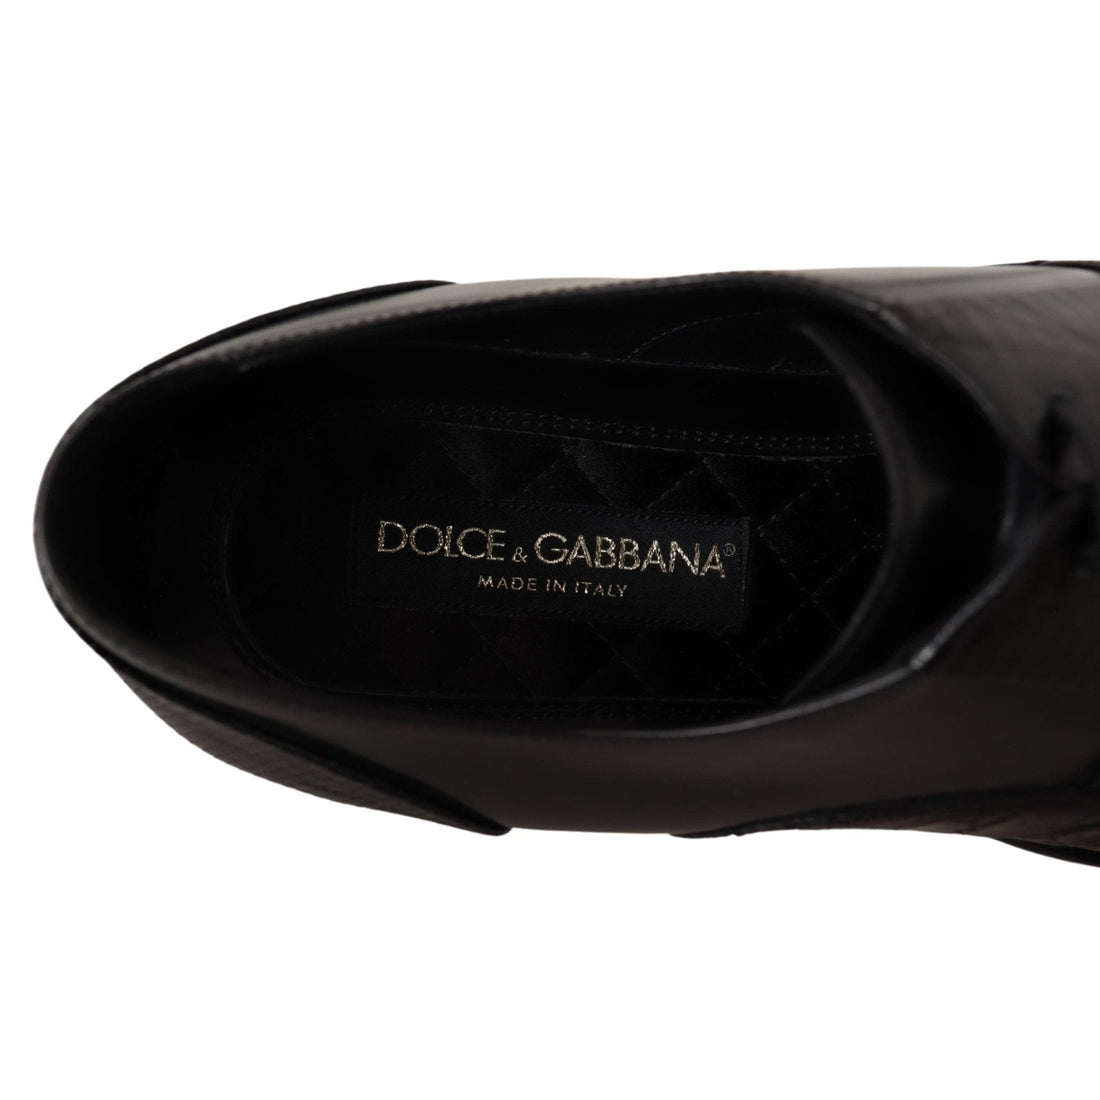 Dolce & Gabbana Black Leather Exotic Skins Formal Shoes - Paris Deluxe